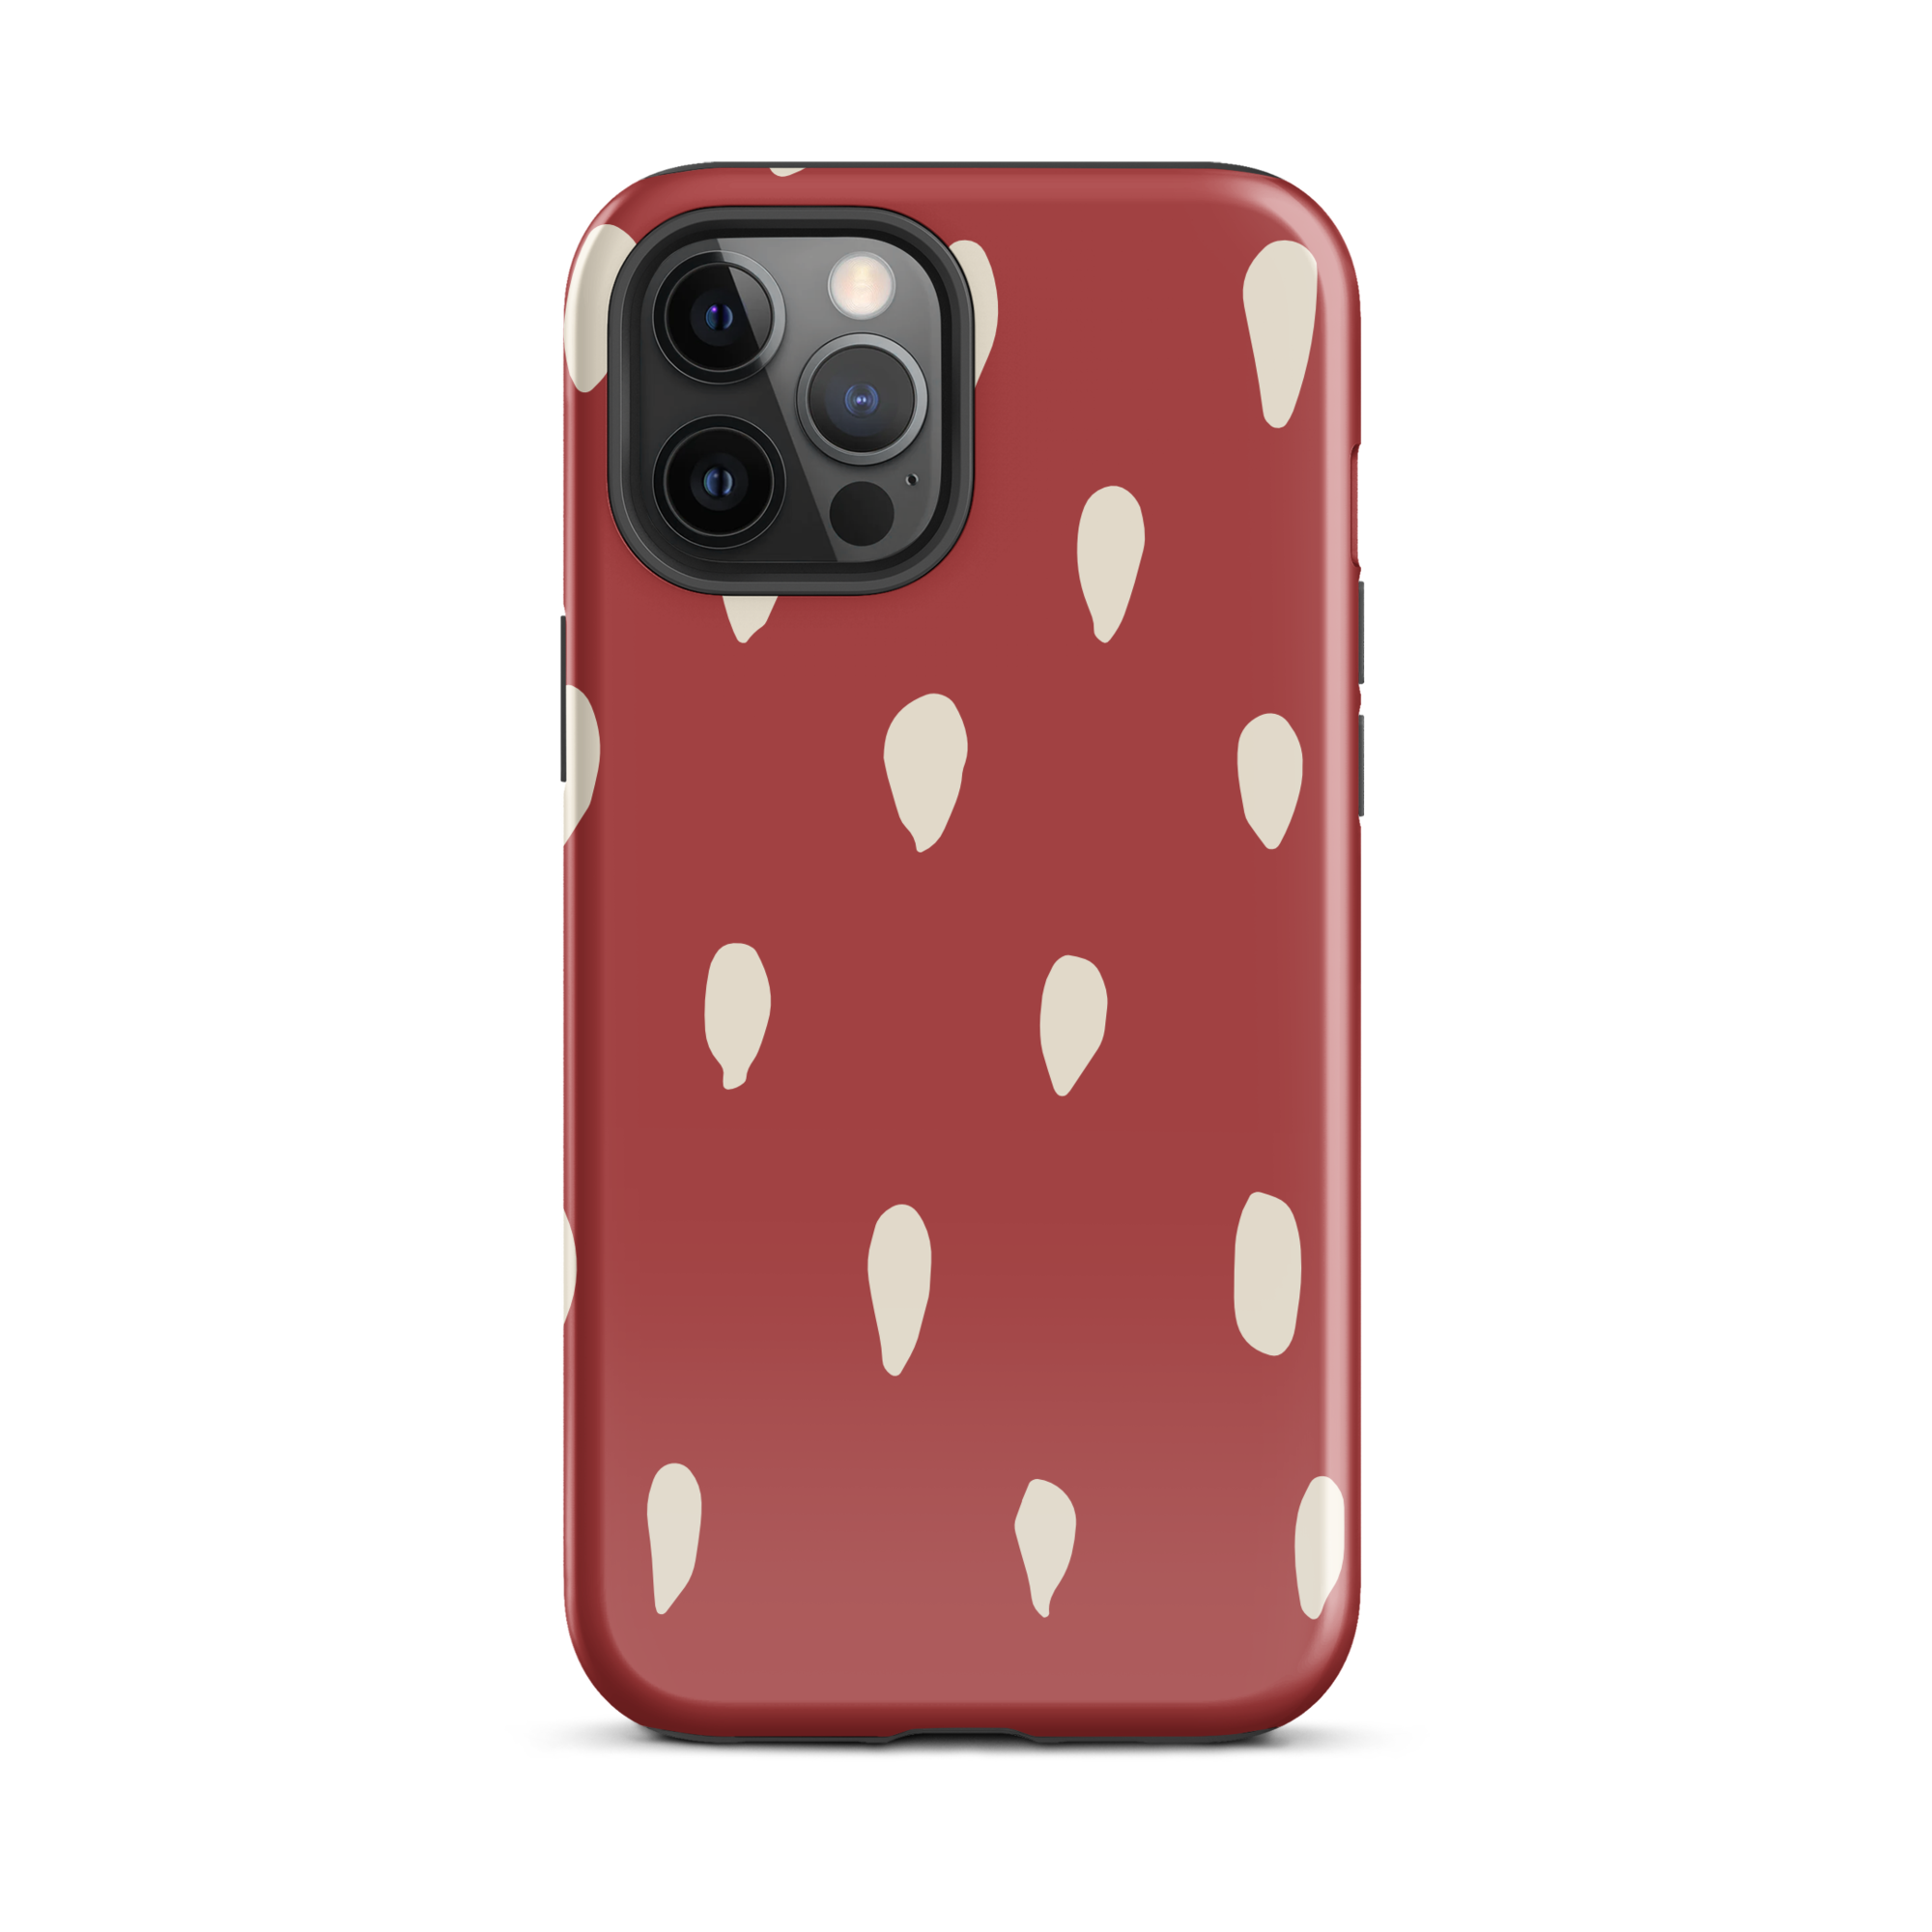 Strawberry Seeds iPhone 12 Pro Max Case